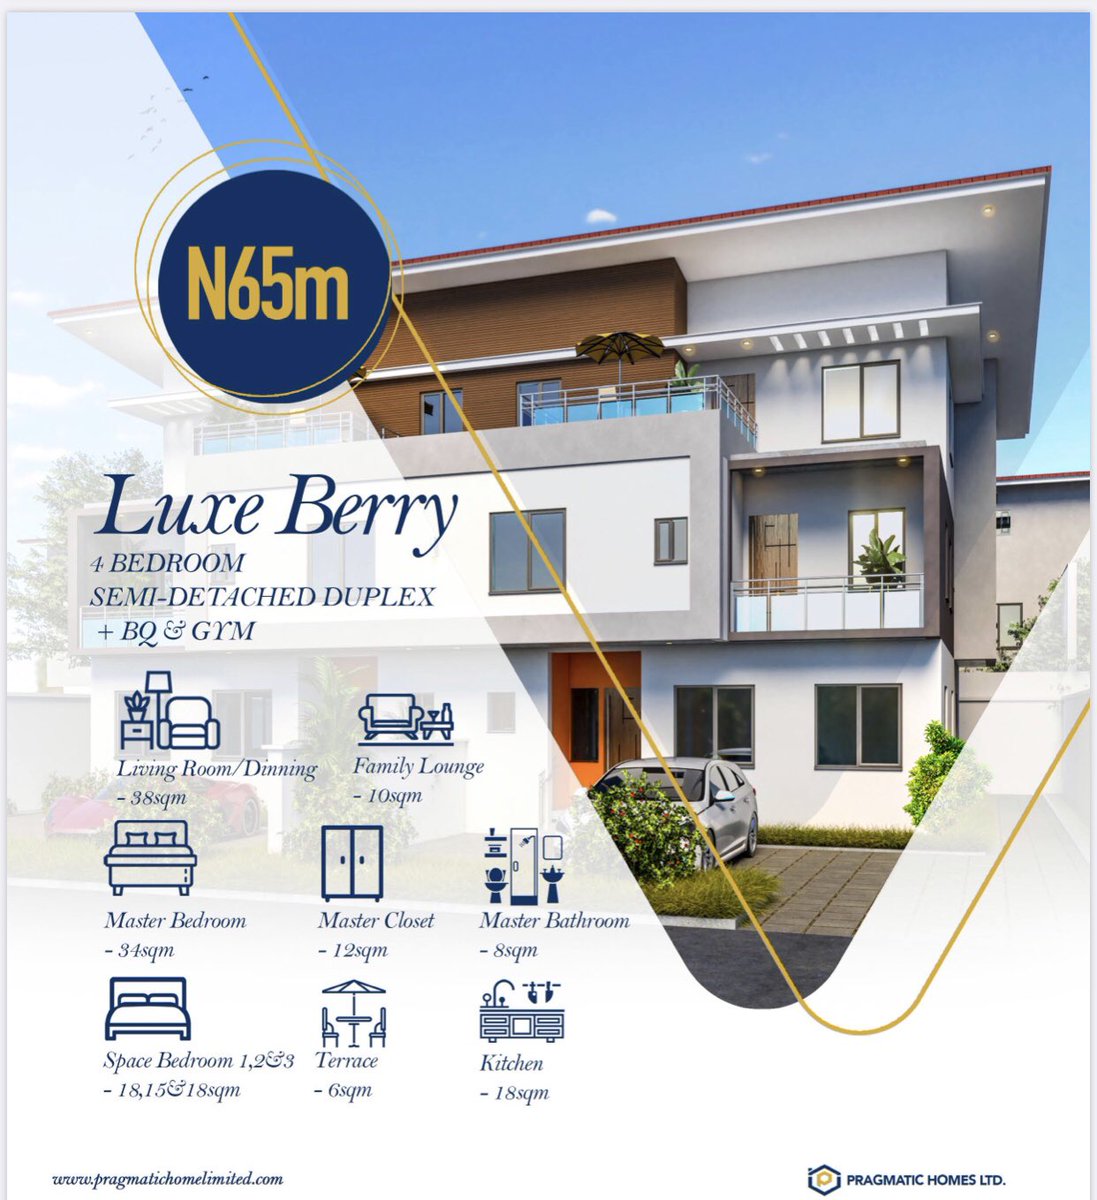 LUXE BERRY A four bedroom semi-detached duplex with a BQ and Gym.  #RealEstate